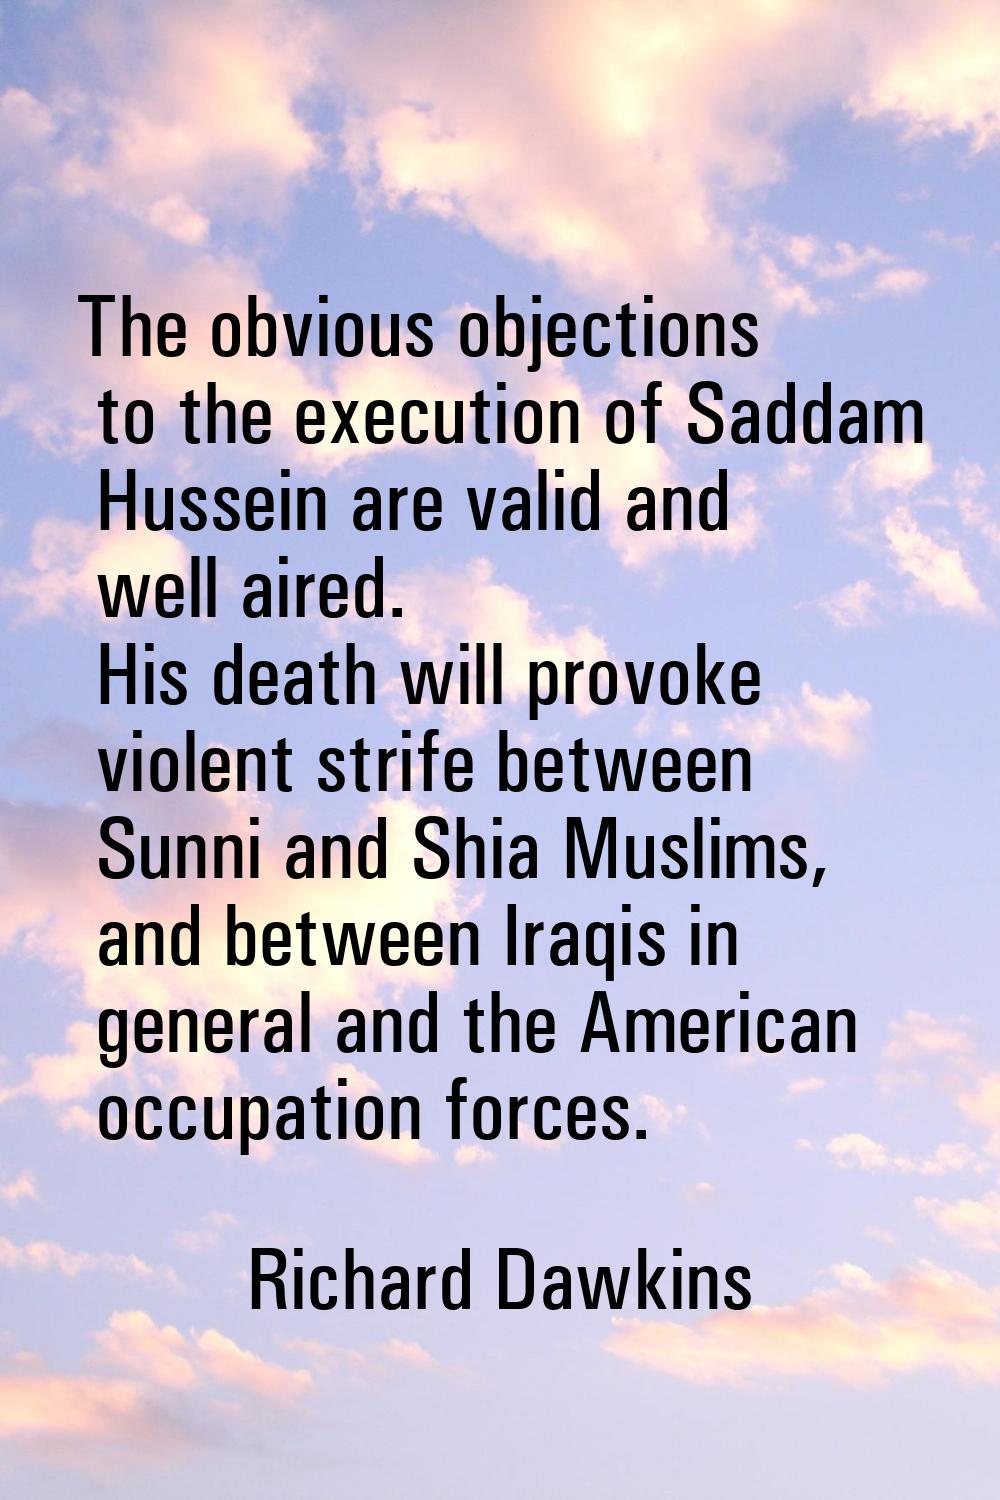 The obvious objections to the execution of Saddam Hussein are valid and well aired. His death will 